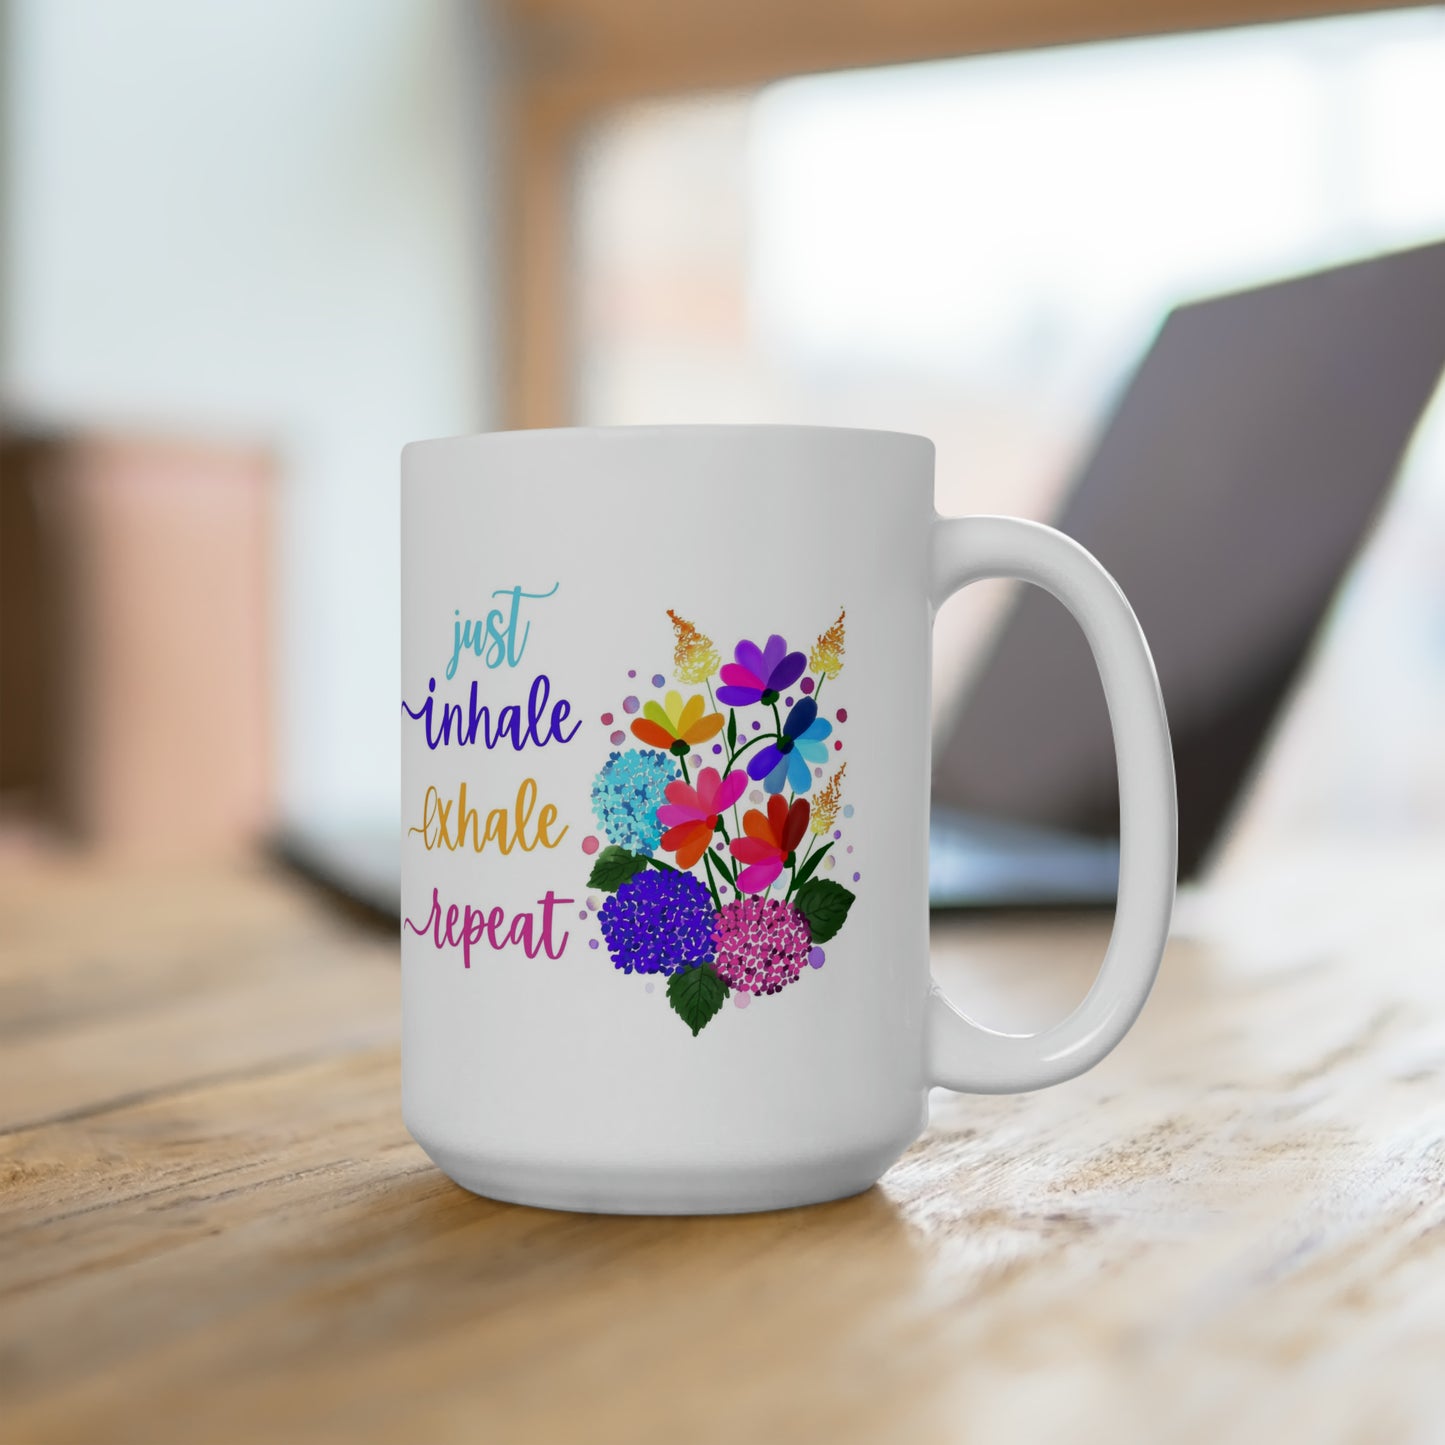 Just Inhale Exhale Repeat Large Coffee Mugs,  15oz Coffee Mugs For Mental Health Coffee Mug for Her, Inspirational Coffee Mug For Gifts